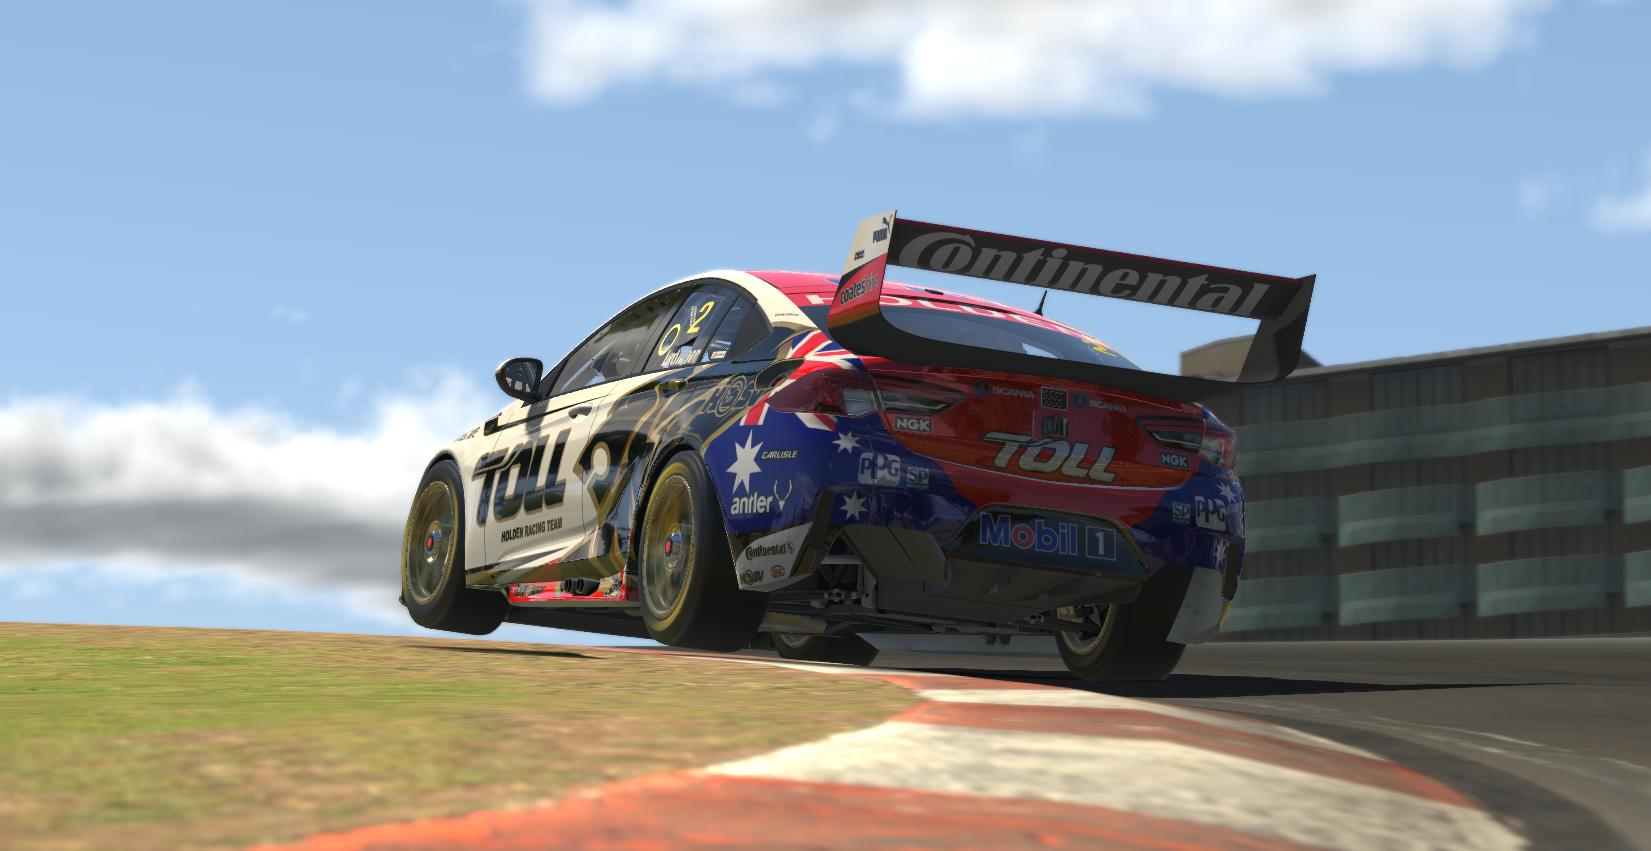 Preview of 2013 Holden Racing Team Toll Austin 400 by Steven Latimore